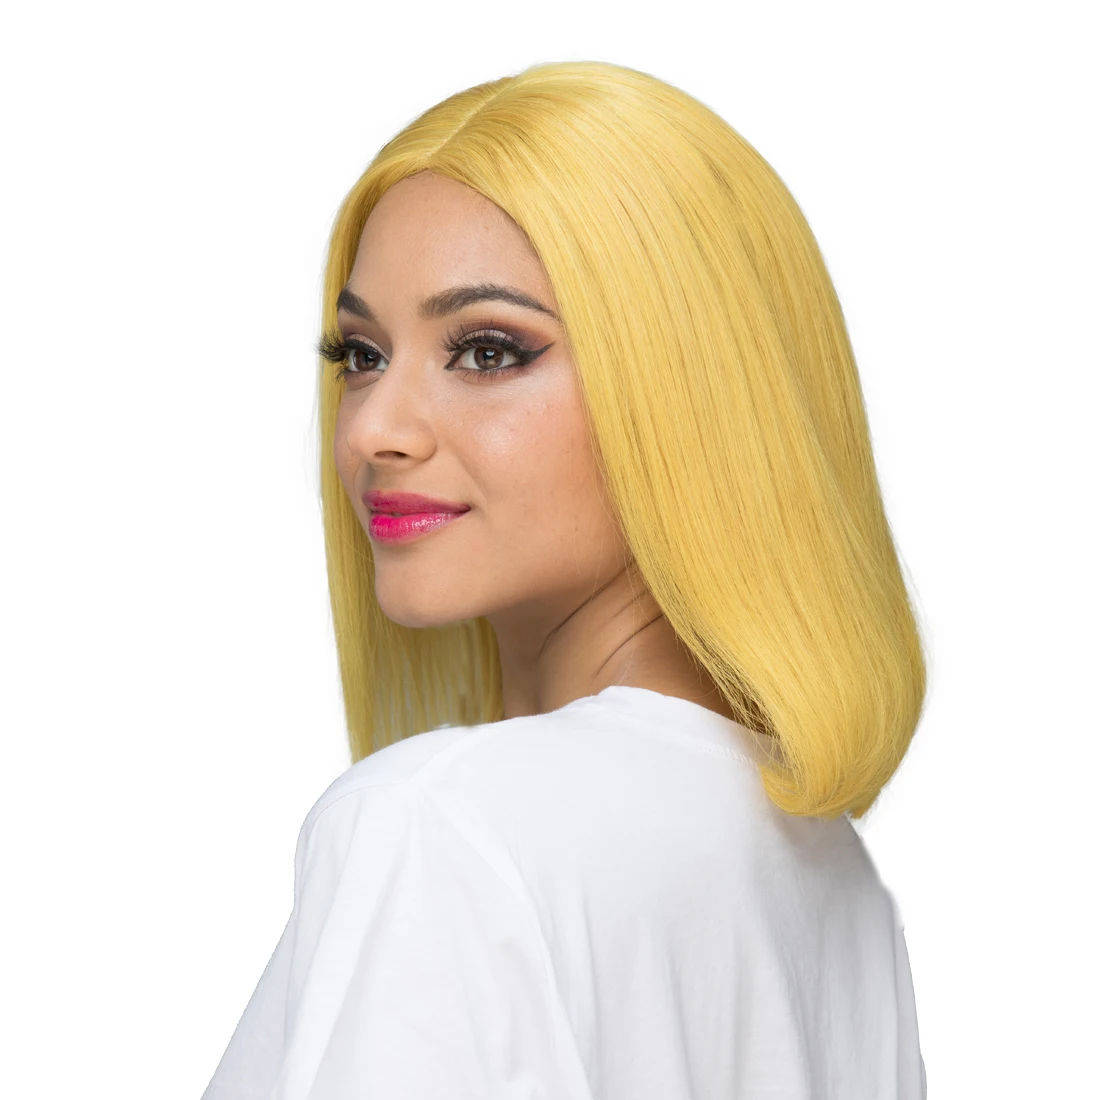 Lsy Hair Ginger Royal Yellow Color Human Hair Bob Wigs, Glueless Straight Short Lace Front Virgin Human Hair Wigs For Sale .jpg